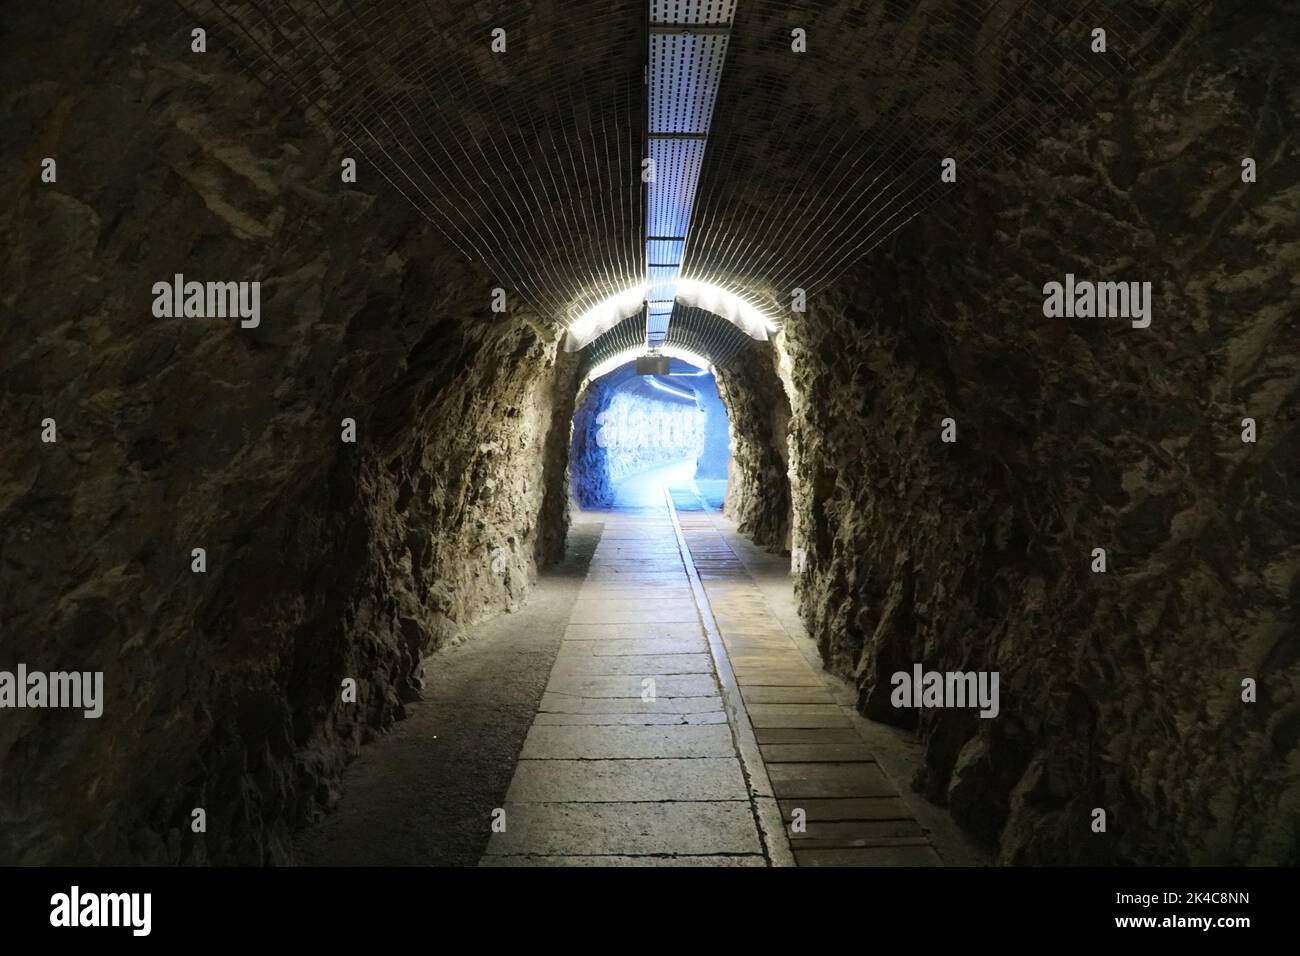 An inside view of an old underground tunnel with a blue light at the end Stock Photo